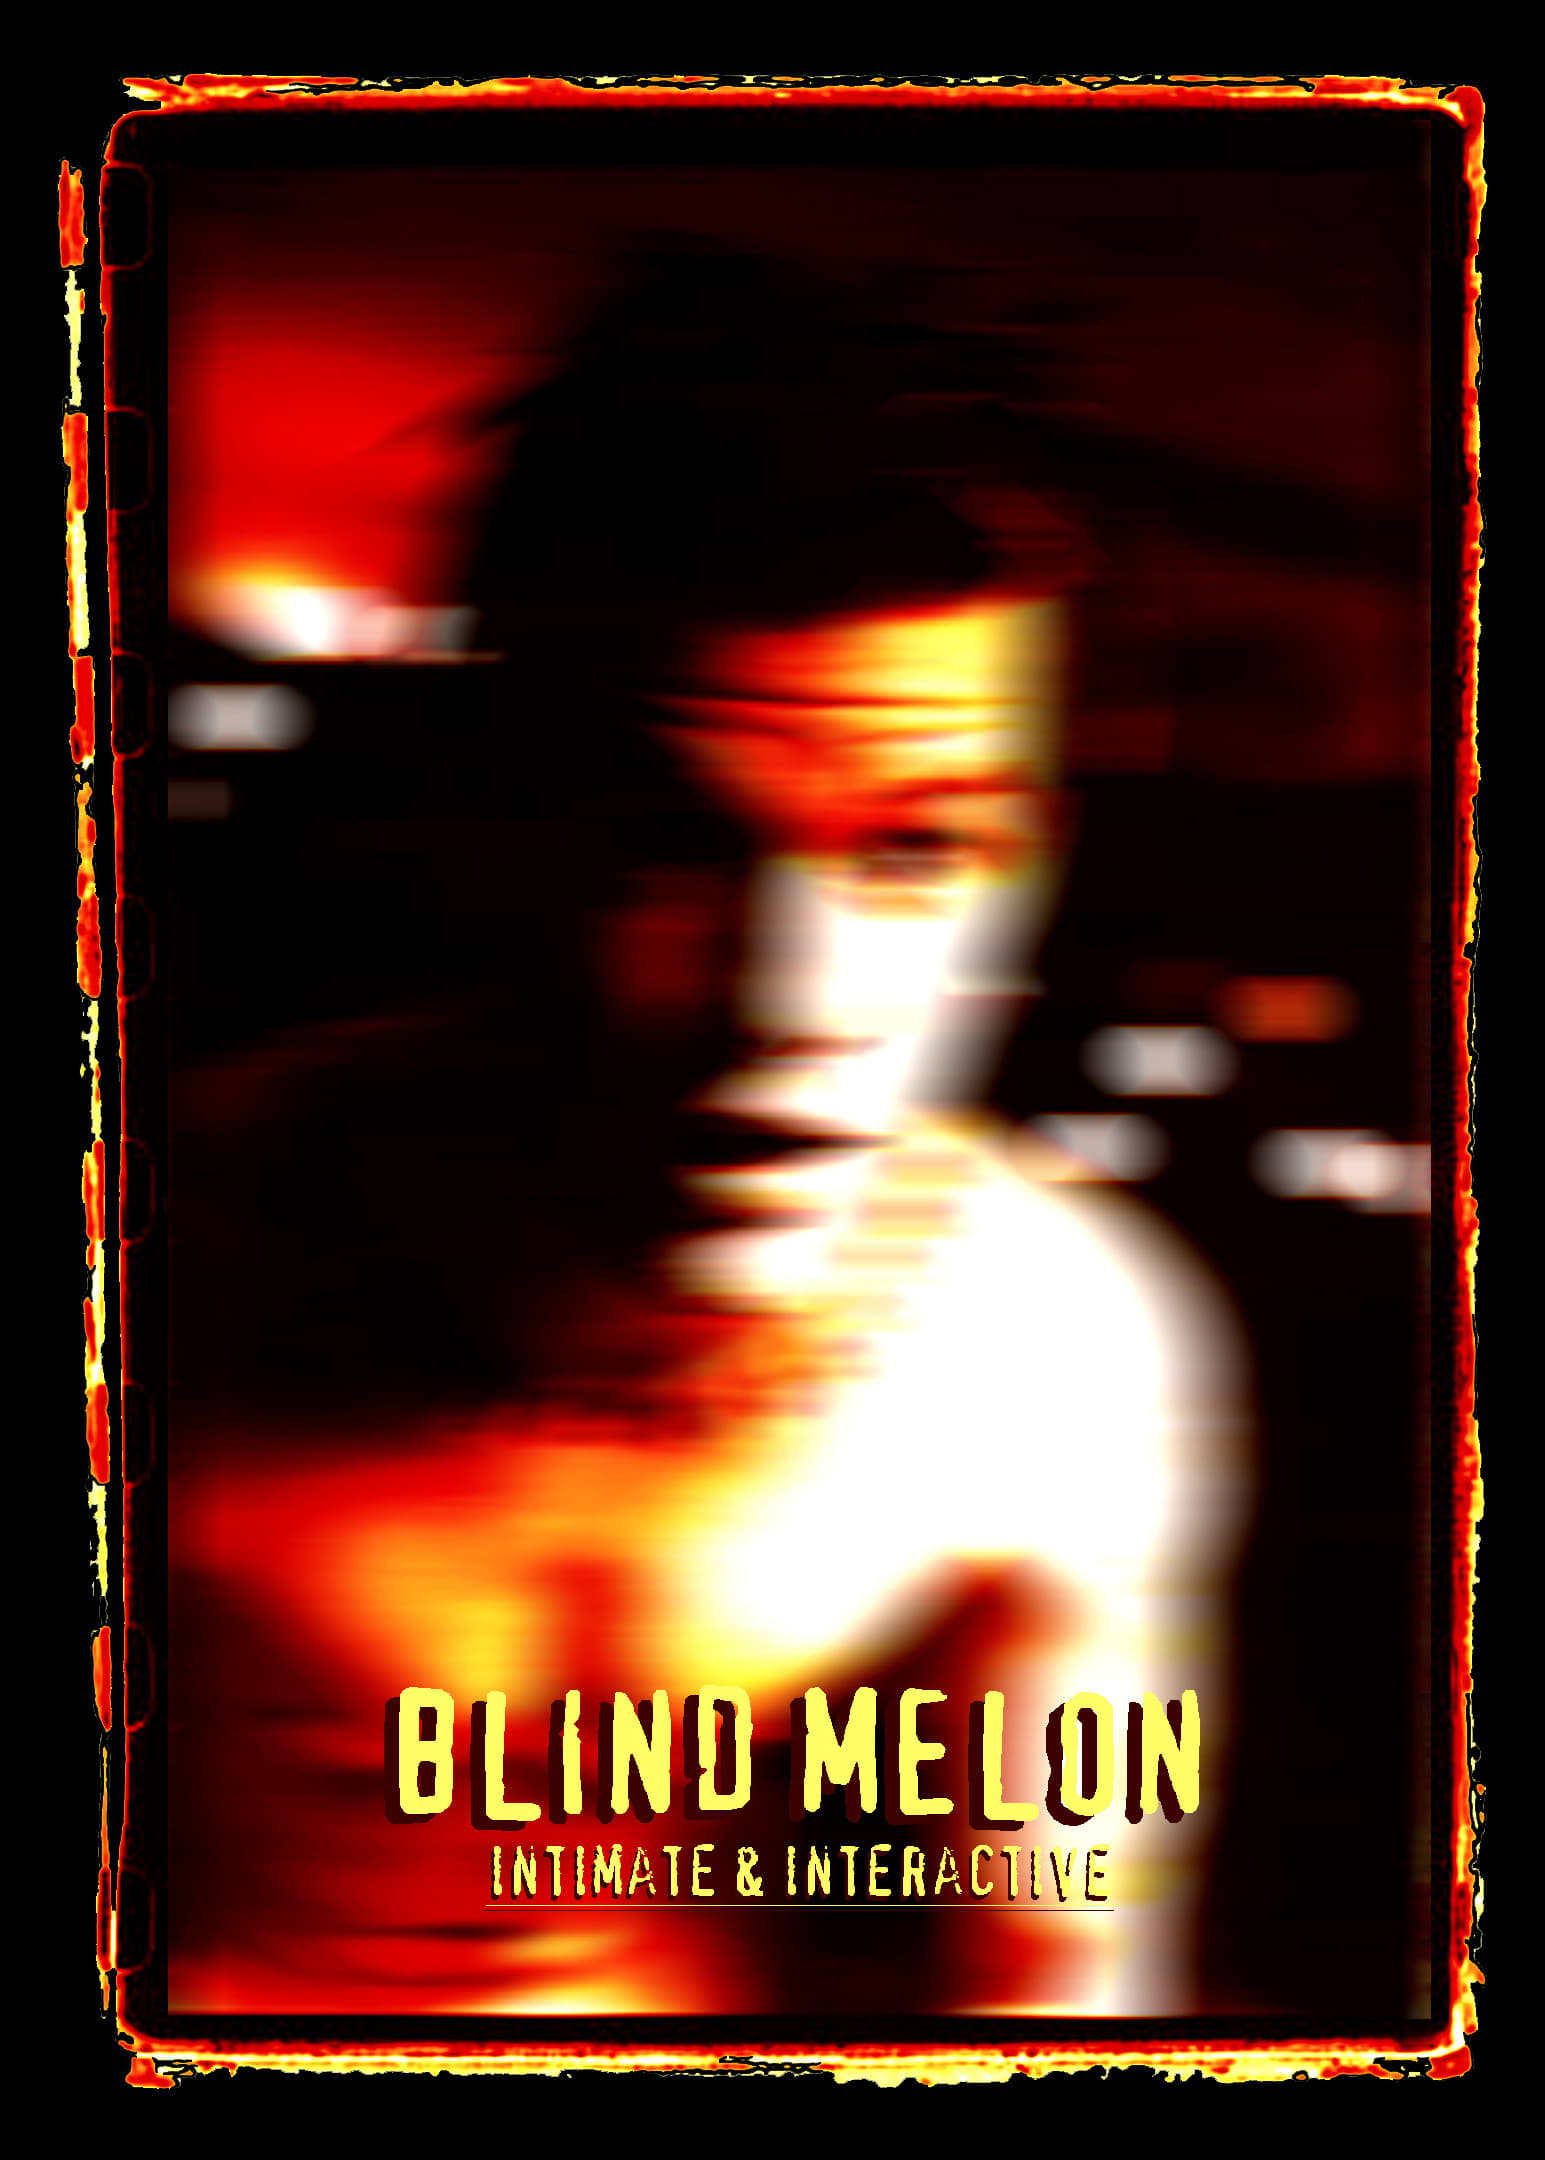 Blind Melon: Intimate and Interactive